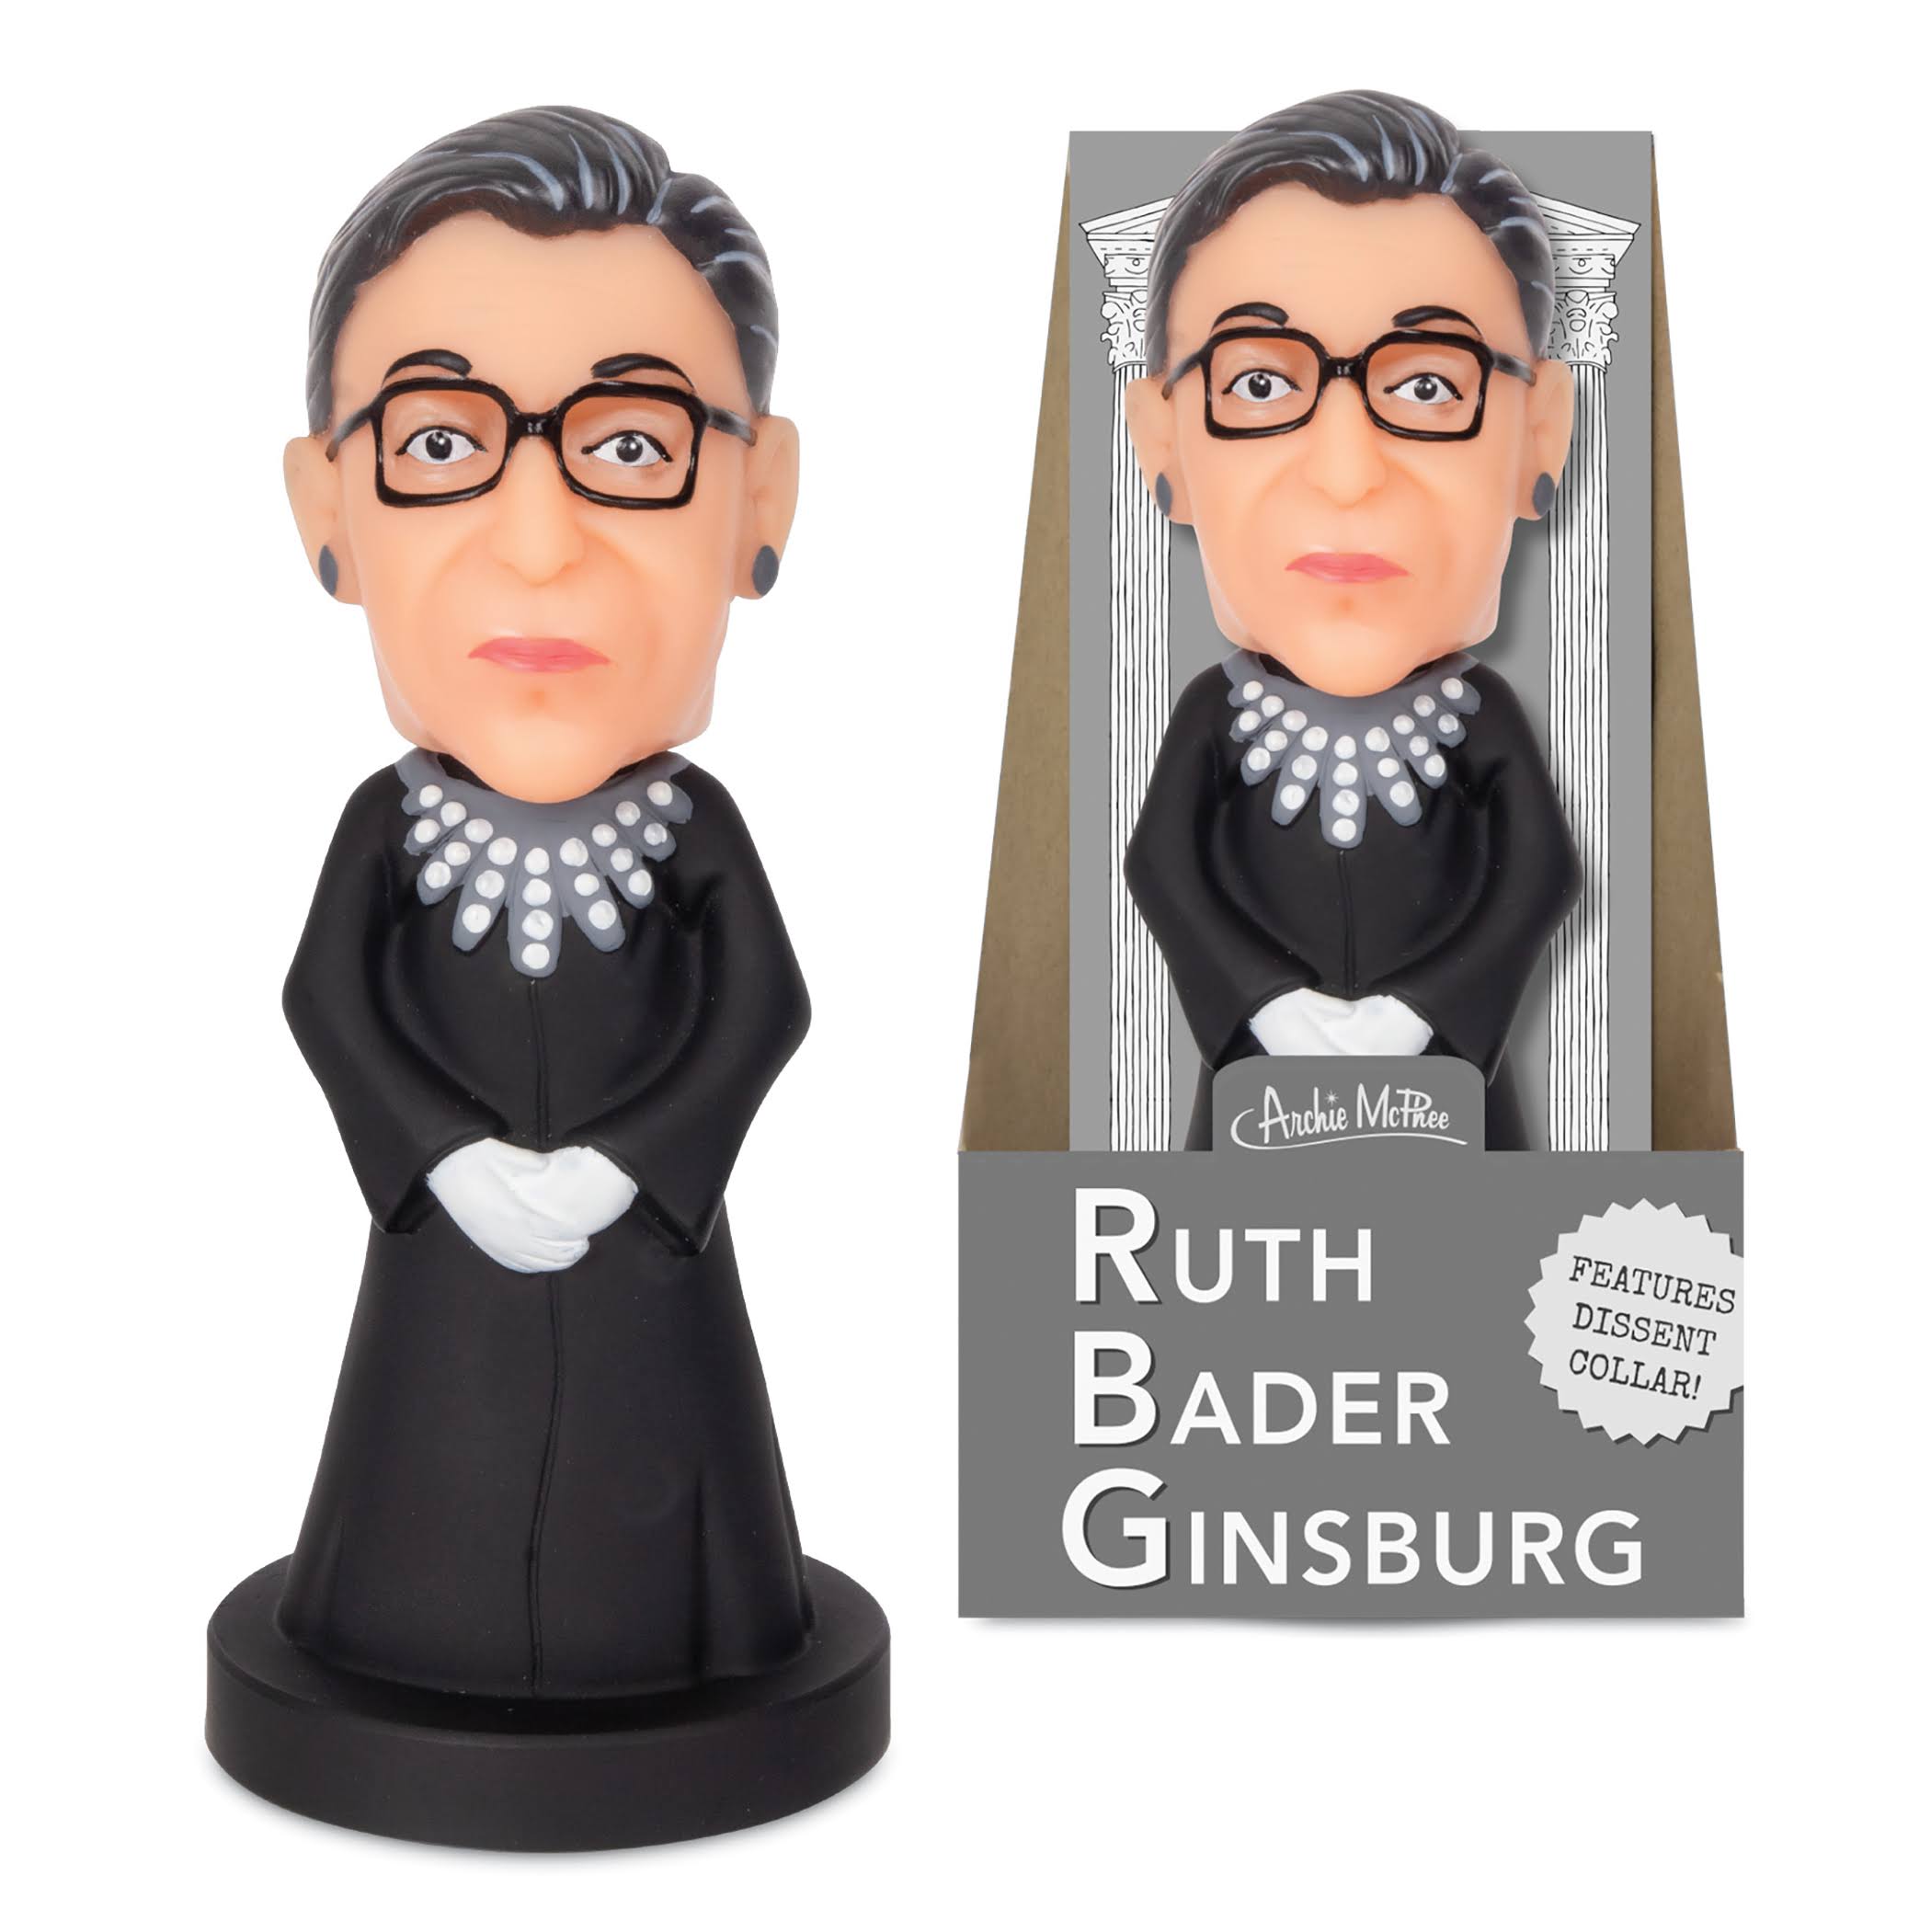 Action Figure - Archie McPhee - Ruth Bader Ginsburg Nodder New 12850 multi-colored 8"